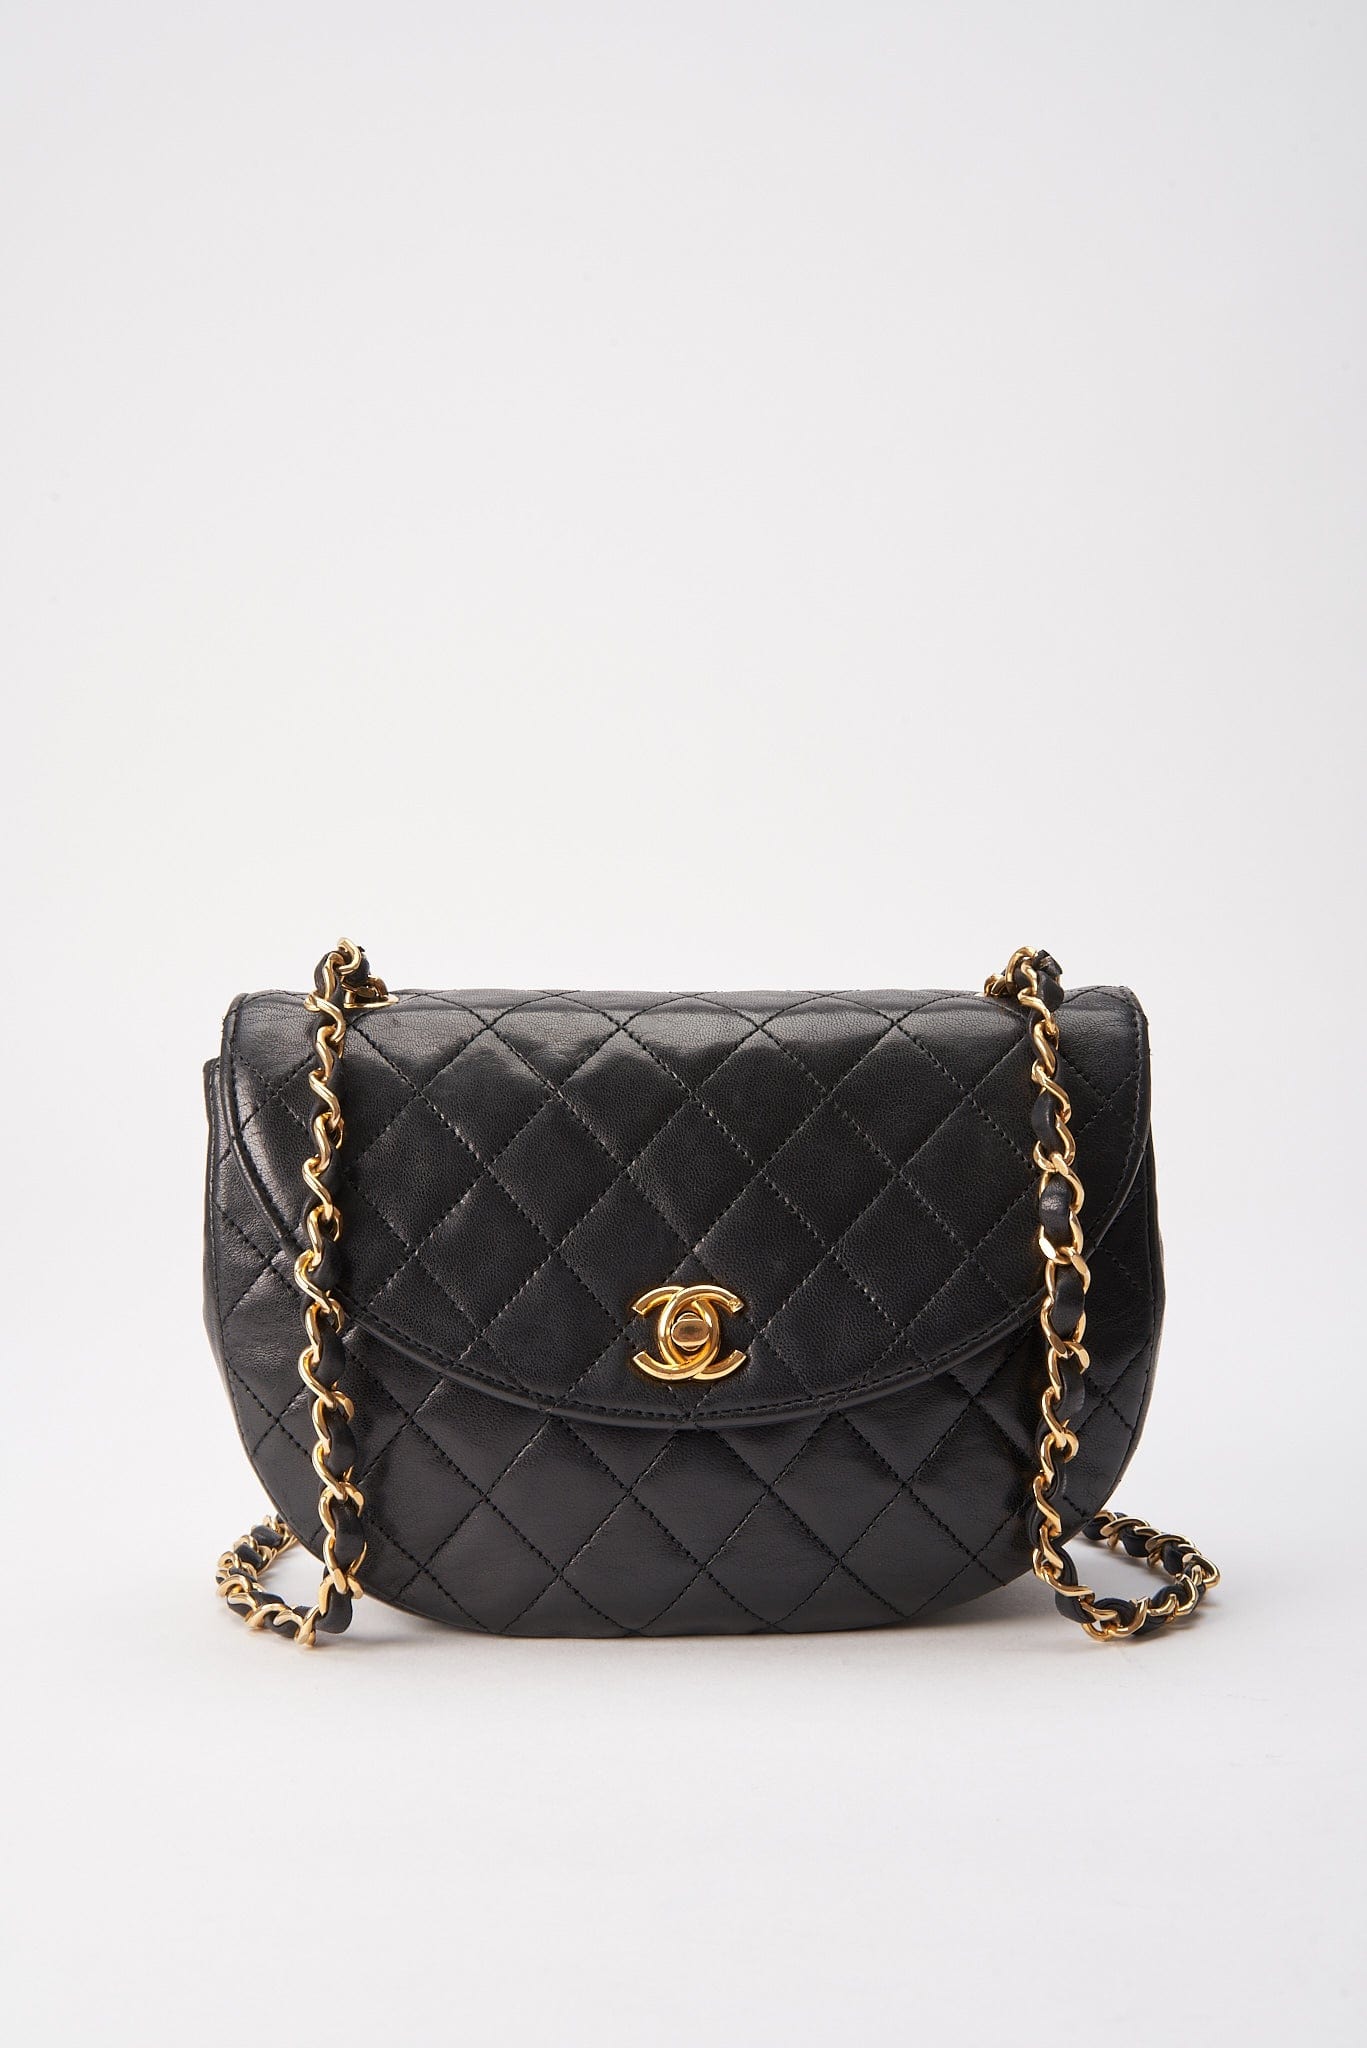 Vintage Chanel Black Half Moon Single Flap with 24k gold plated